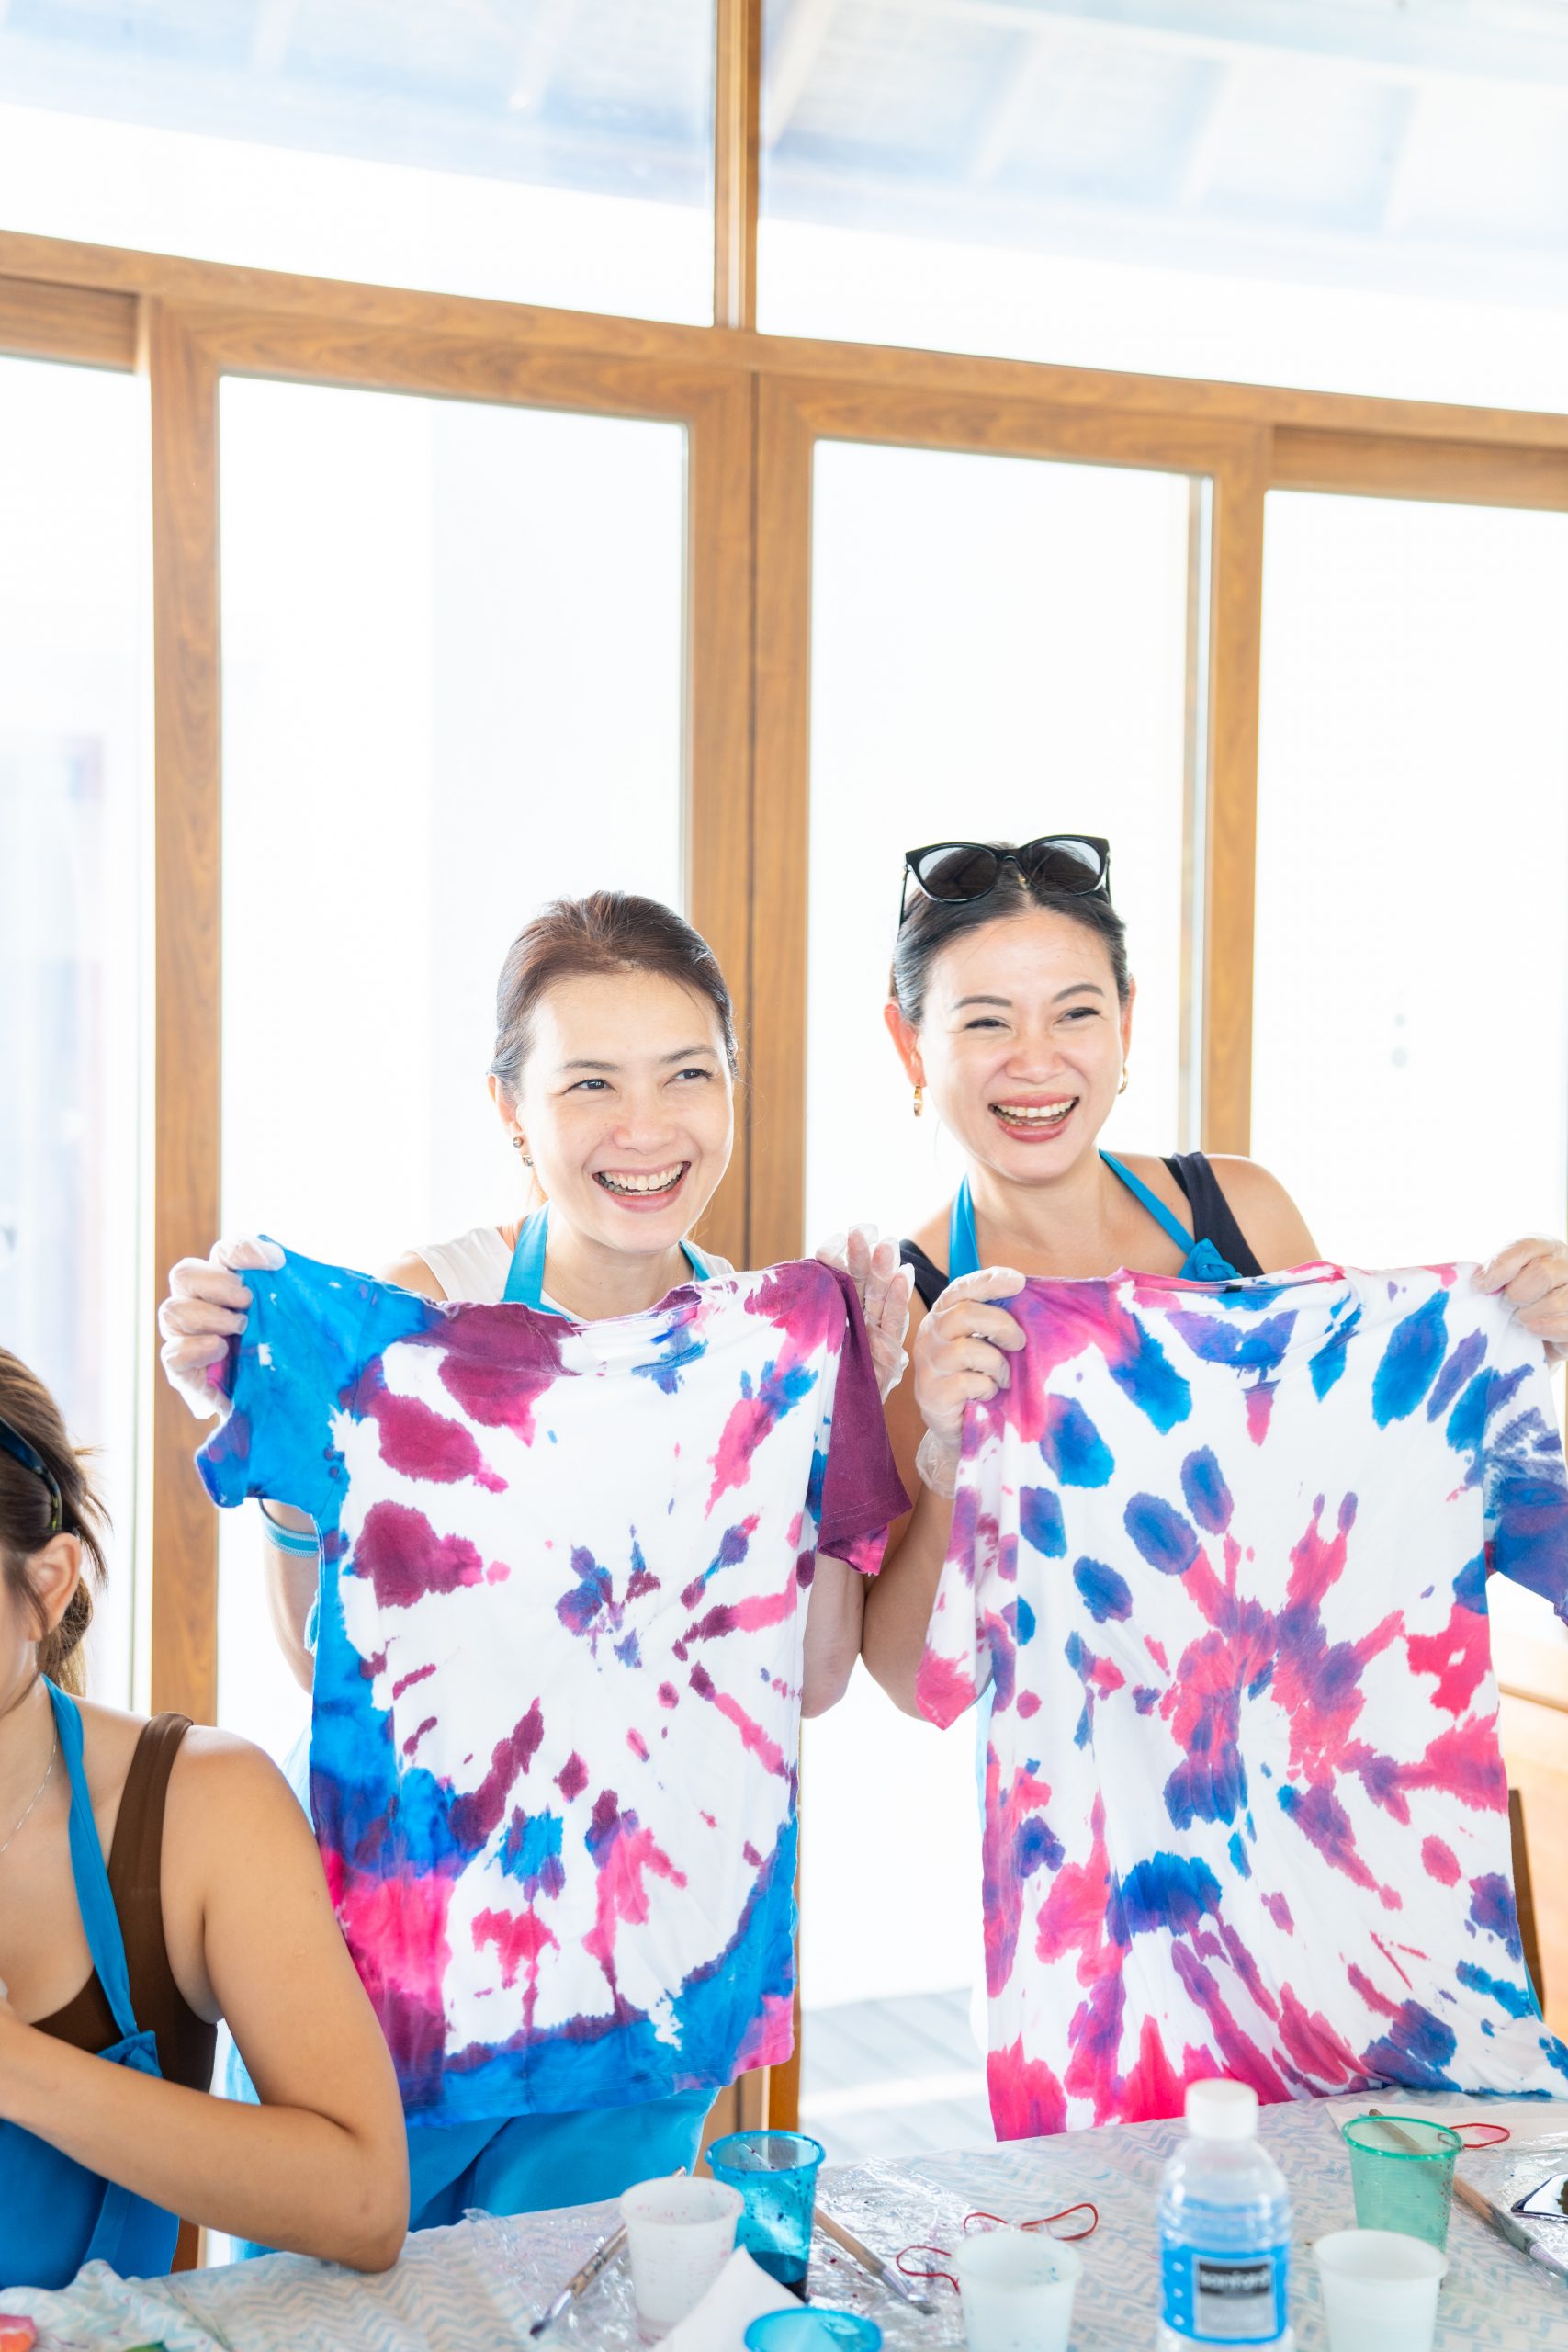 Ching Lin and Tjin with matching tie-dye shirts